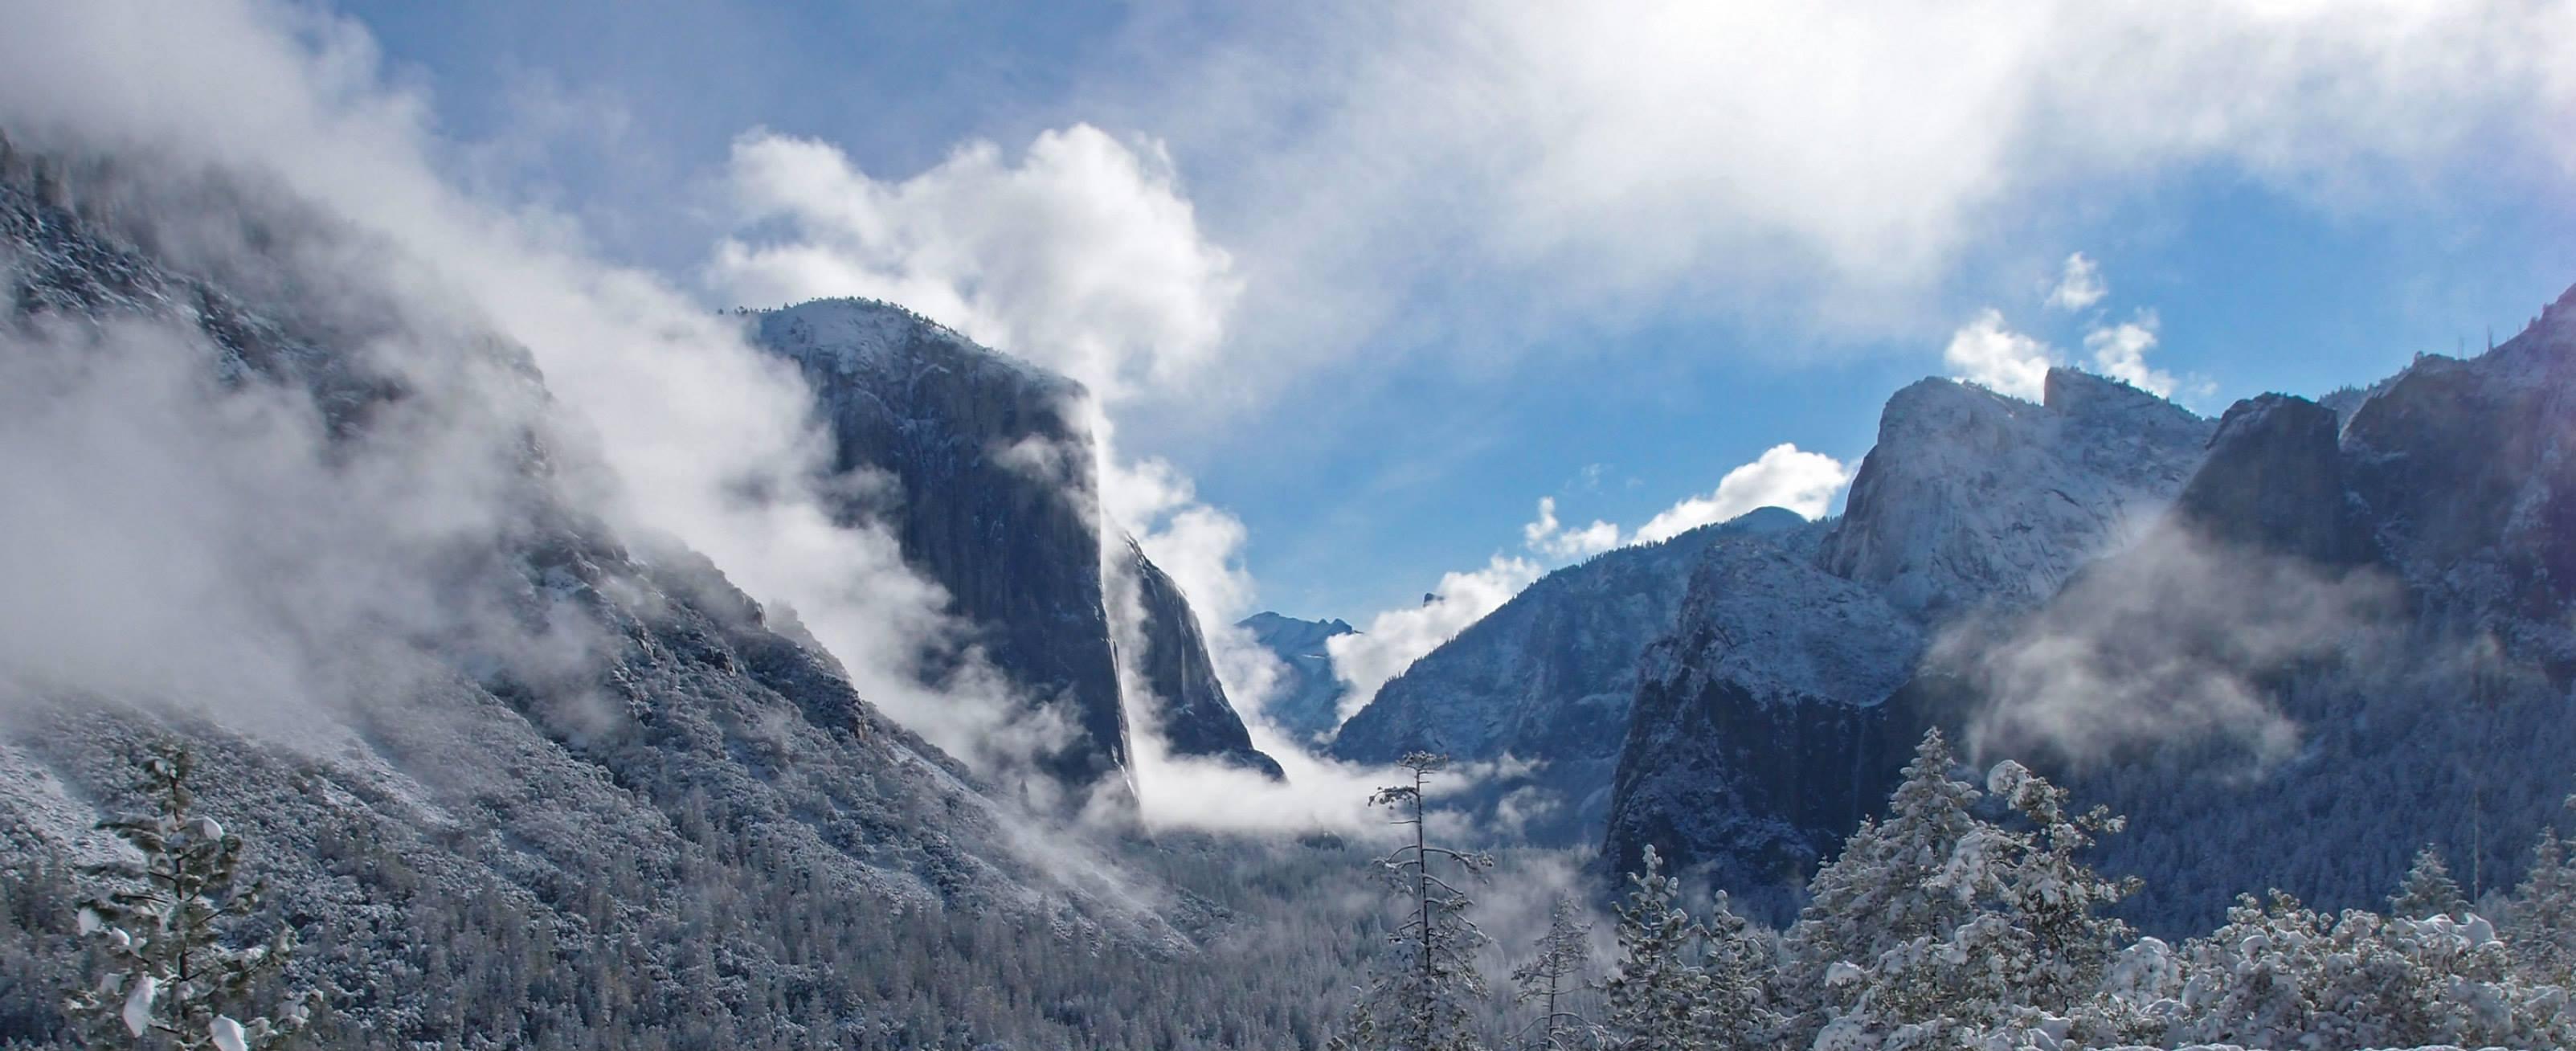 El Capitan on left, Cathedral Rocks on the right, all covered in snow, low clouds and sun